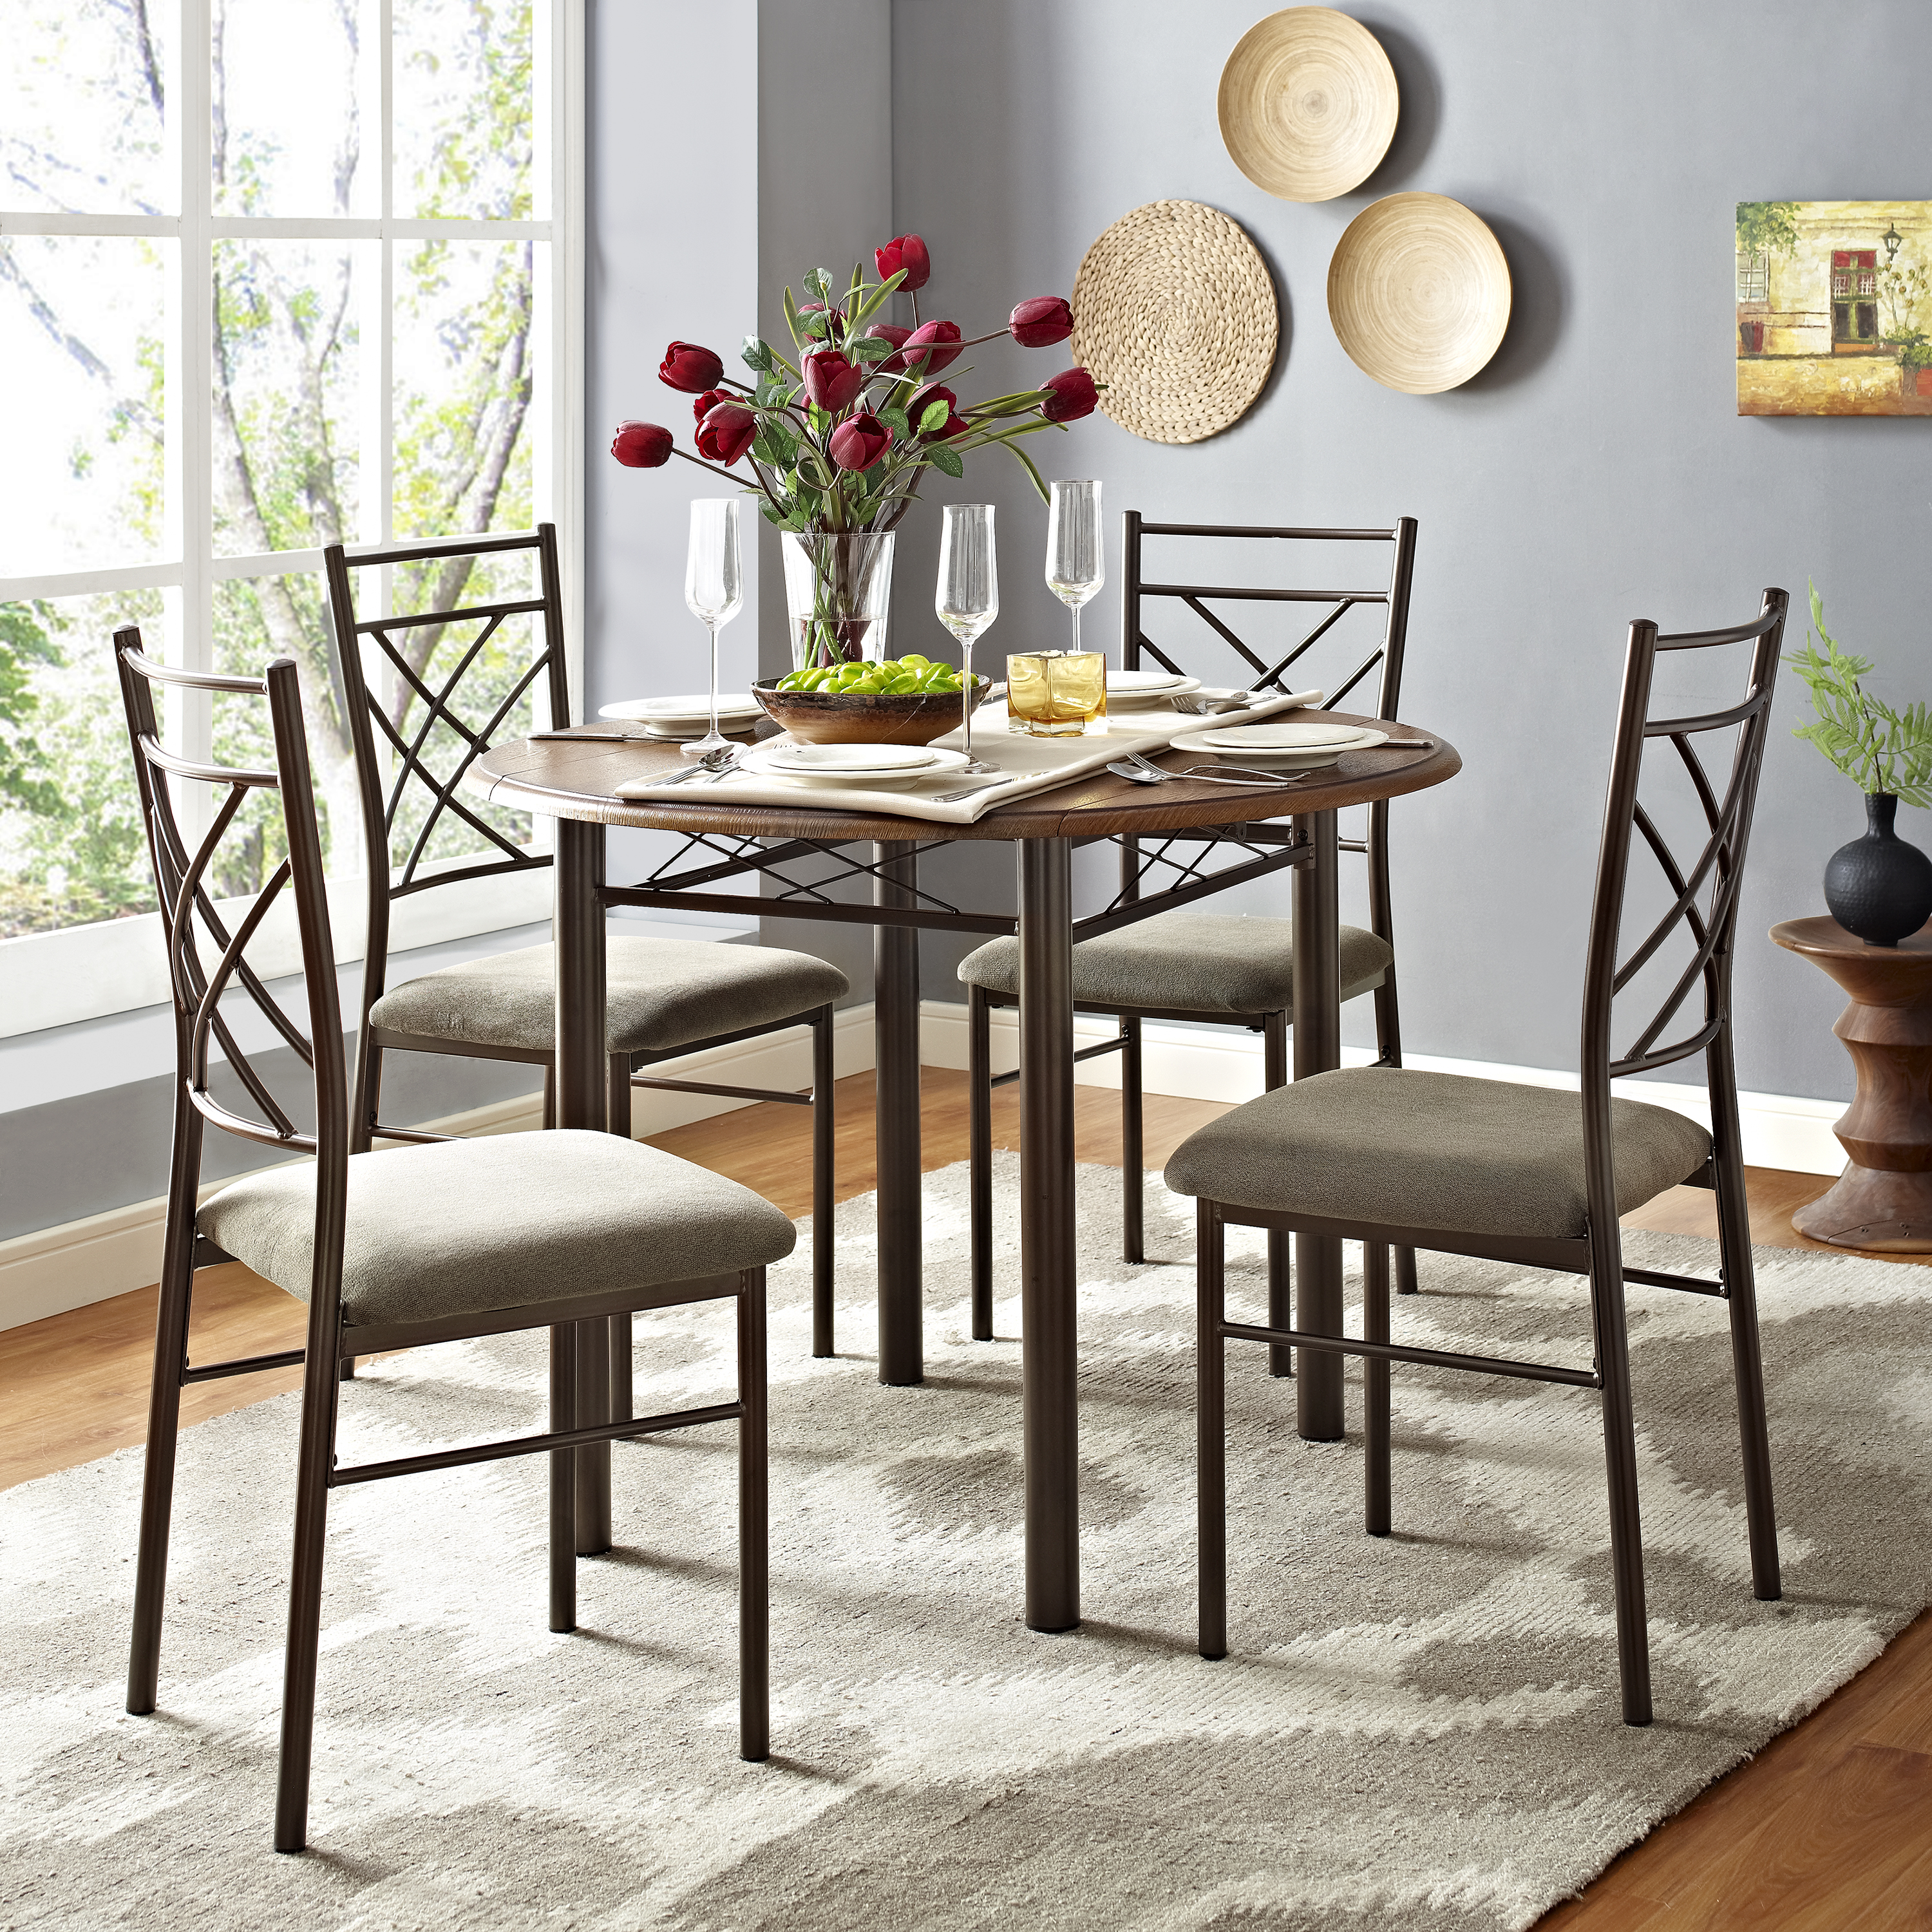 Small Dining Table Sets Kmart, Kmart Dining Room Sets